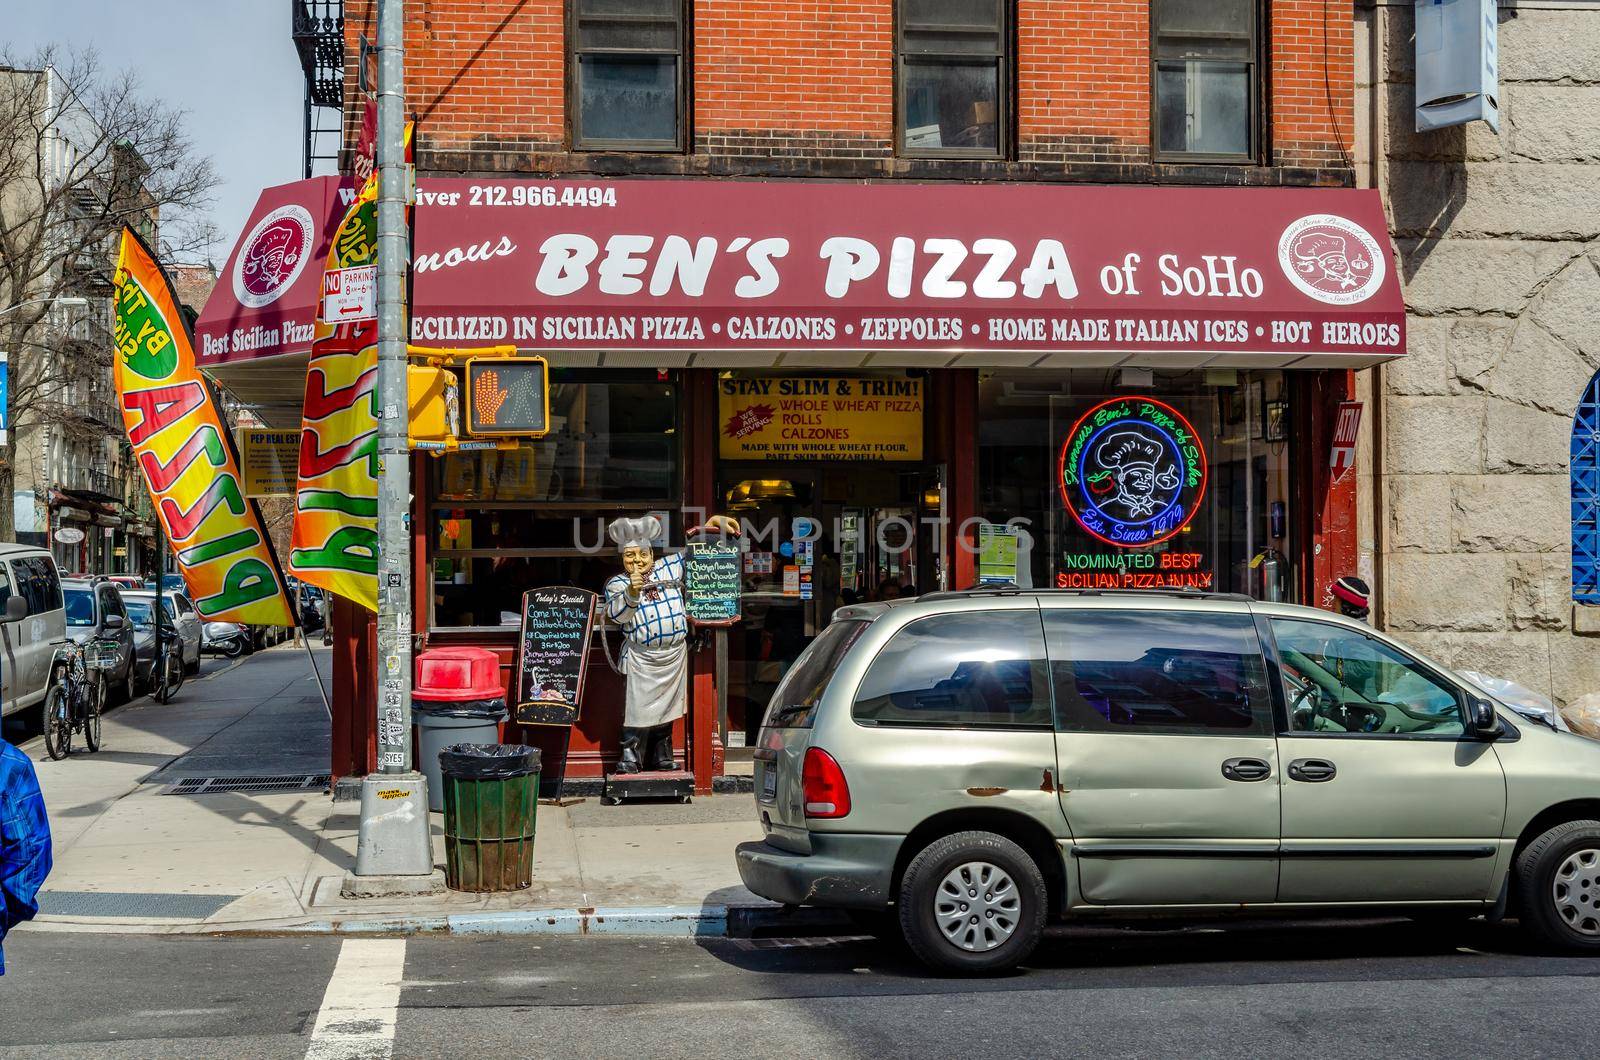 Ben's Pizza of SoHo Restaurant with Car parked in front, New York City by bildgigant